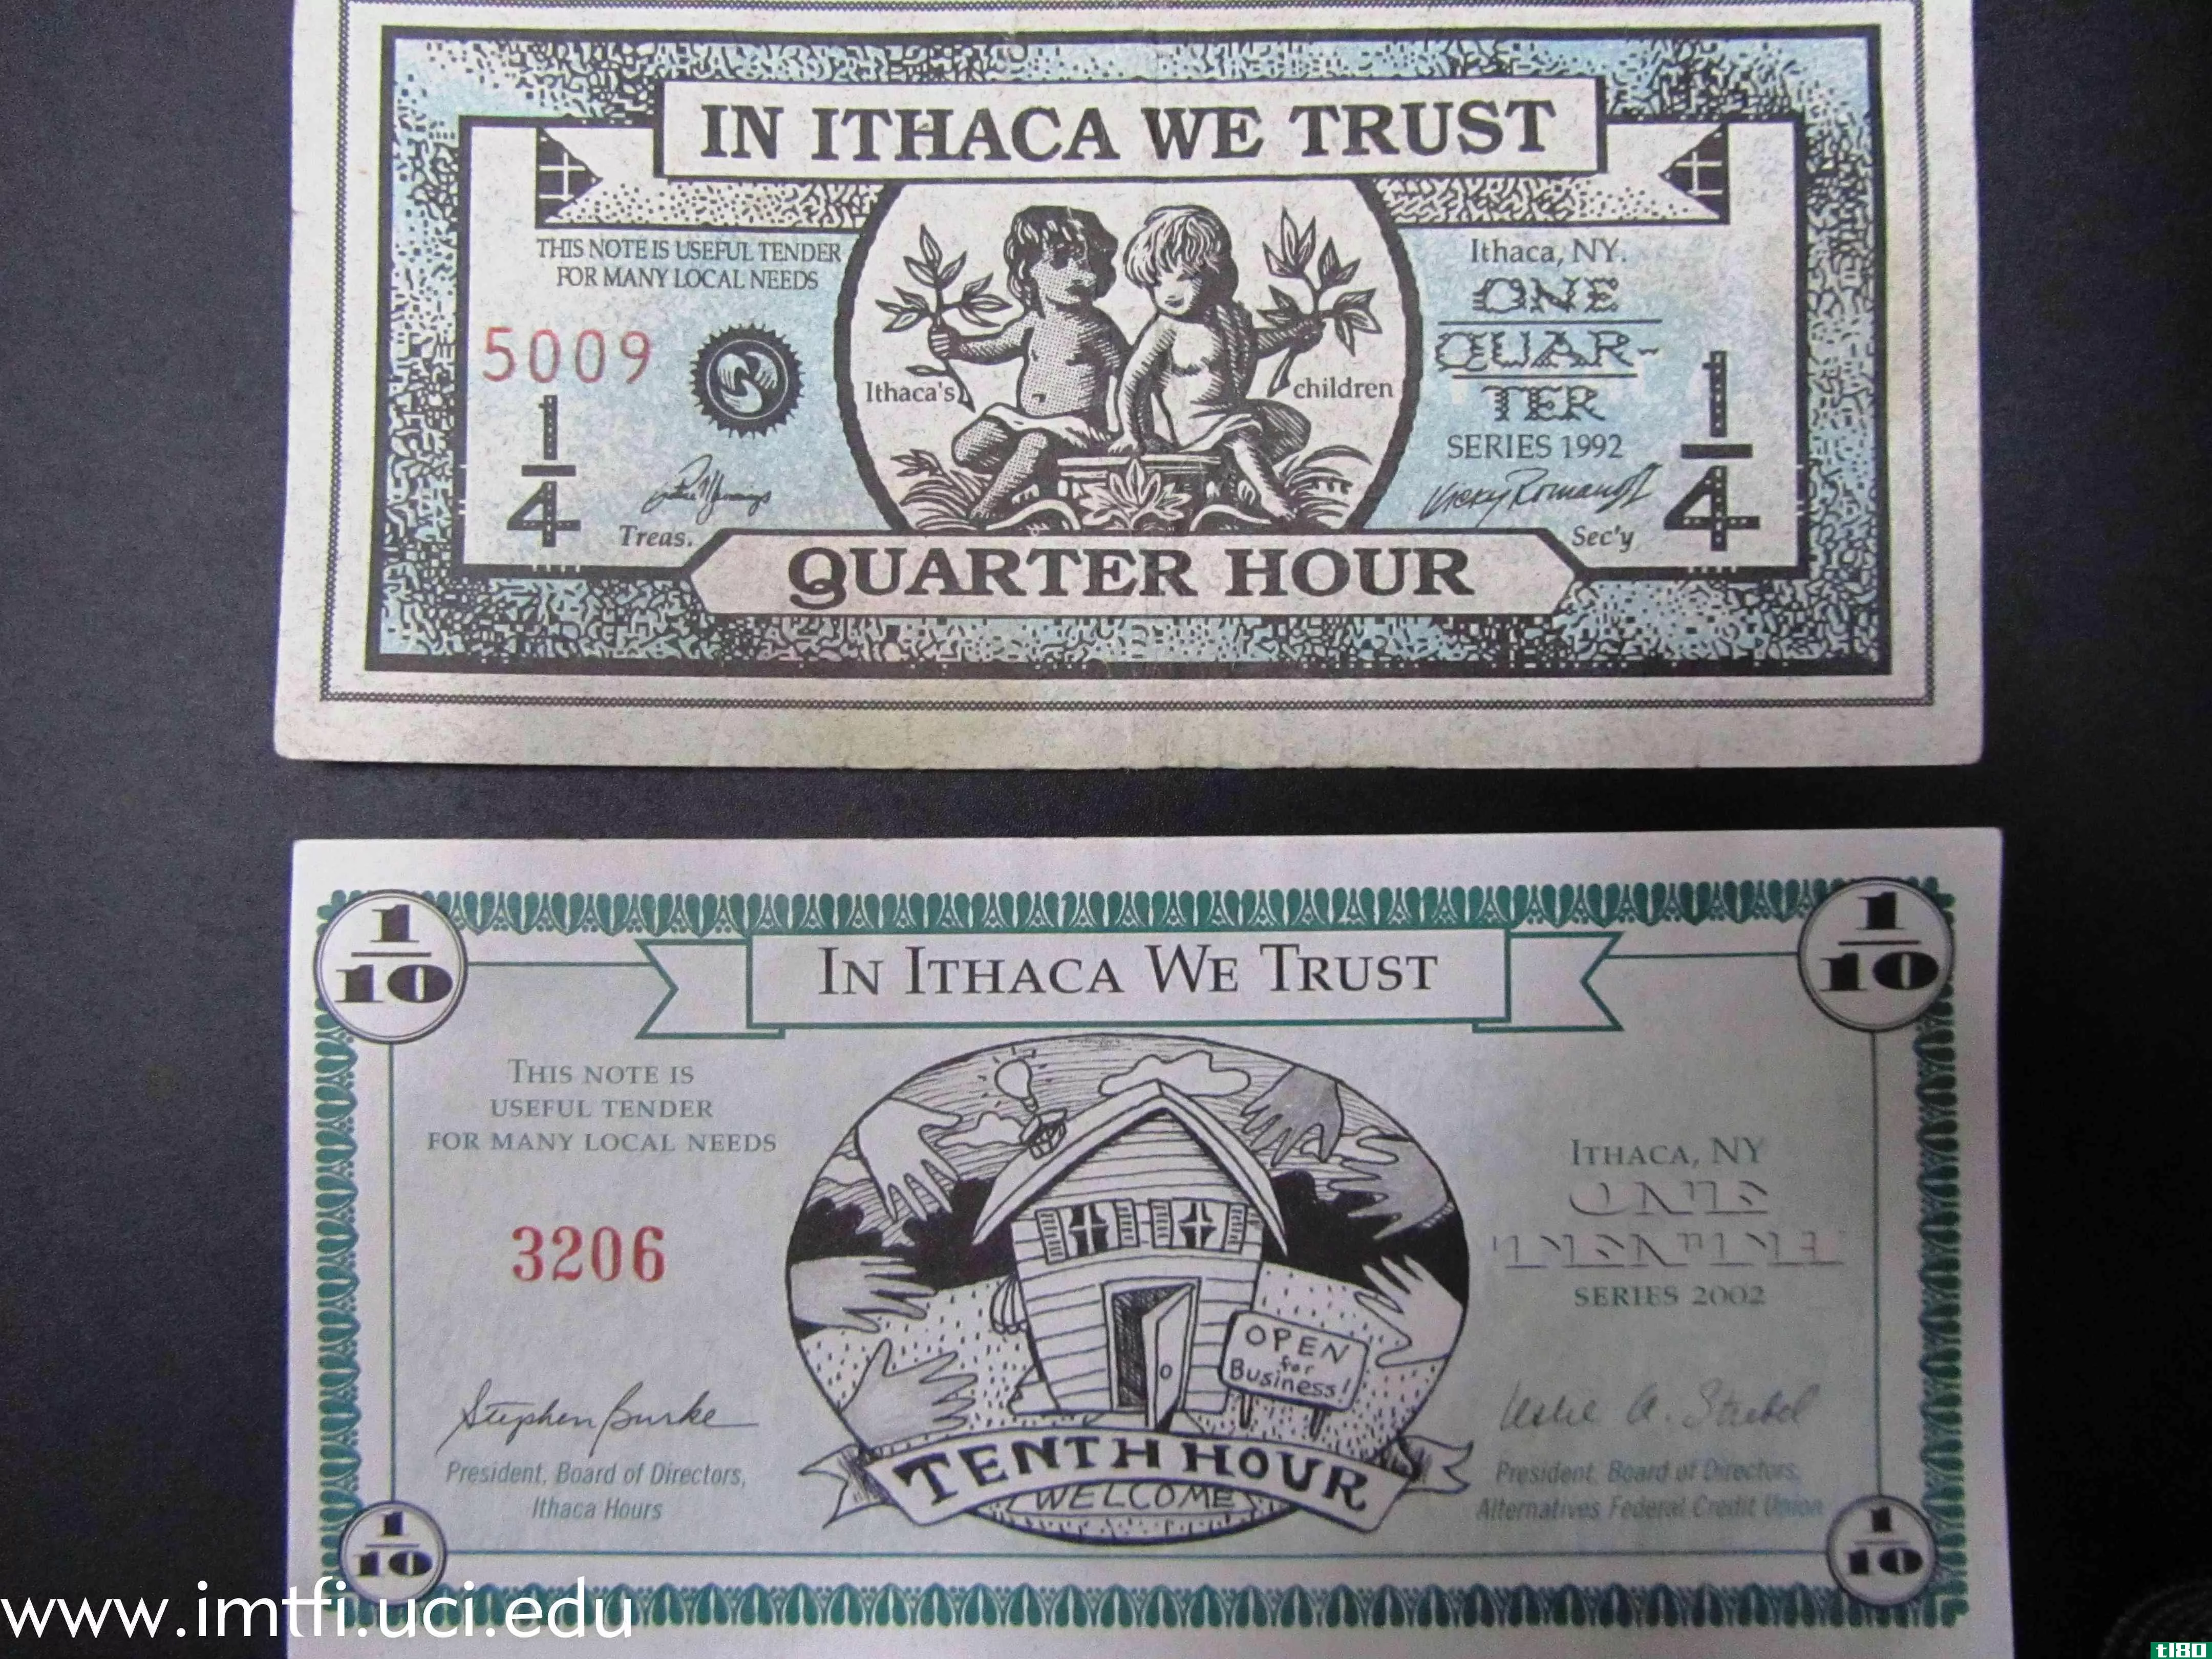 Ithaca Hours, the Local Currency